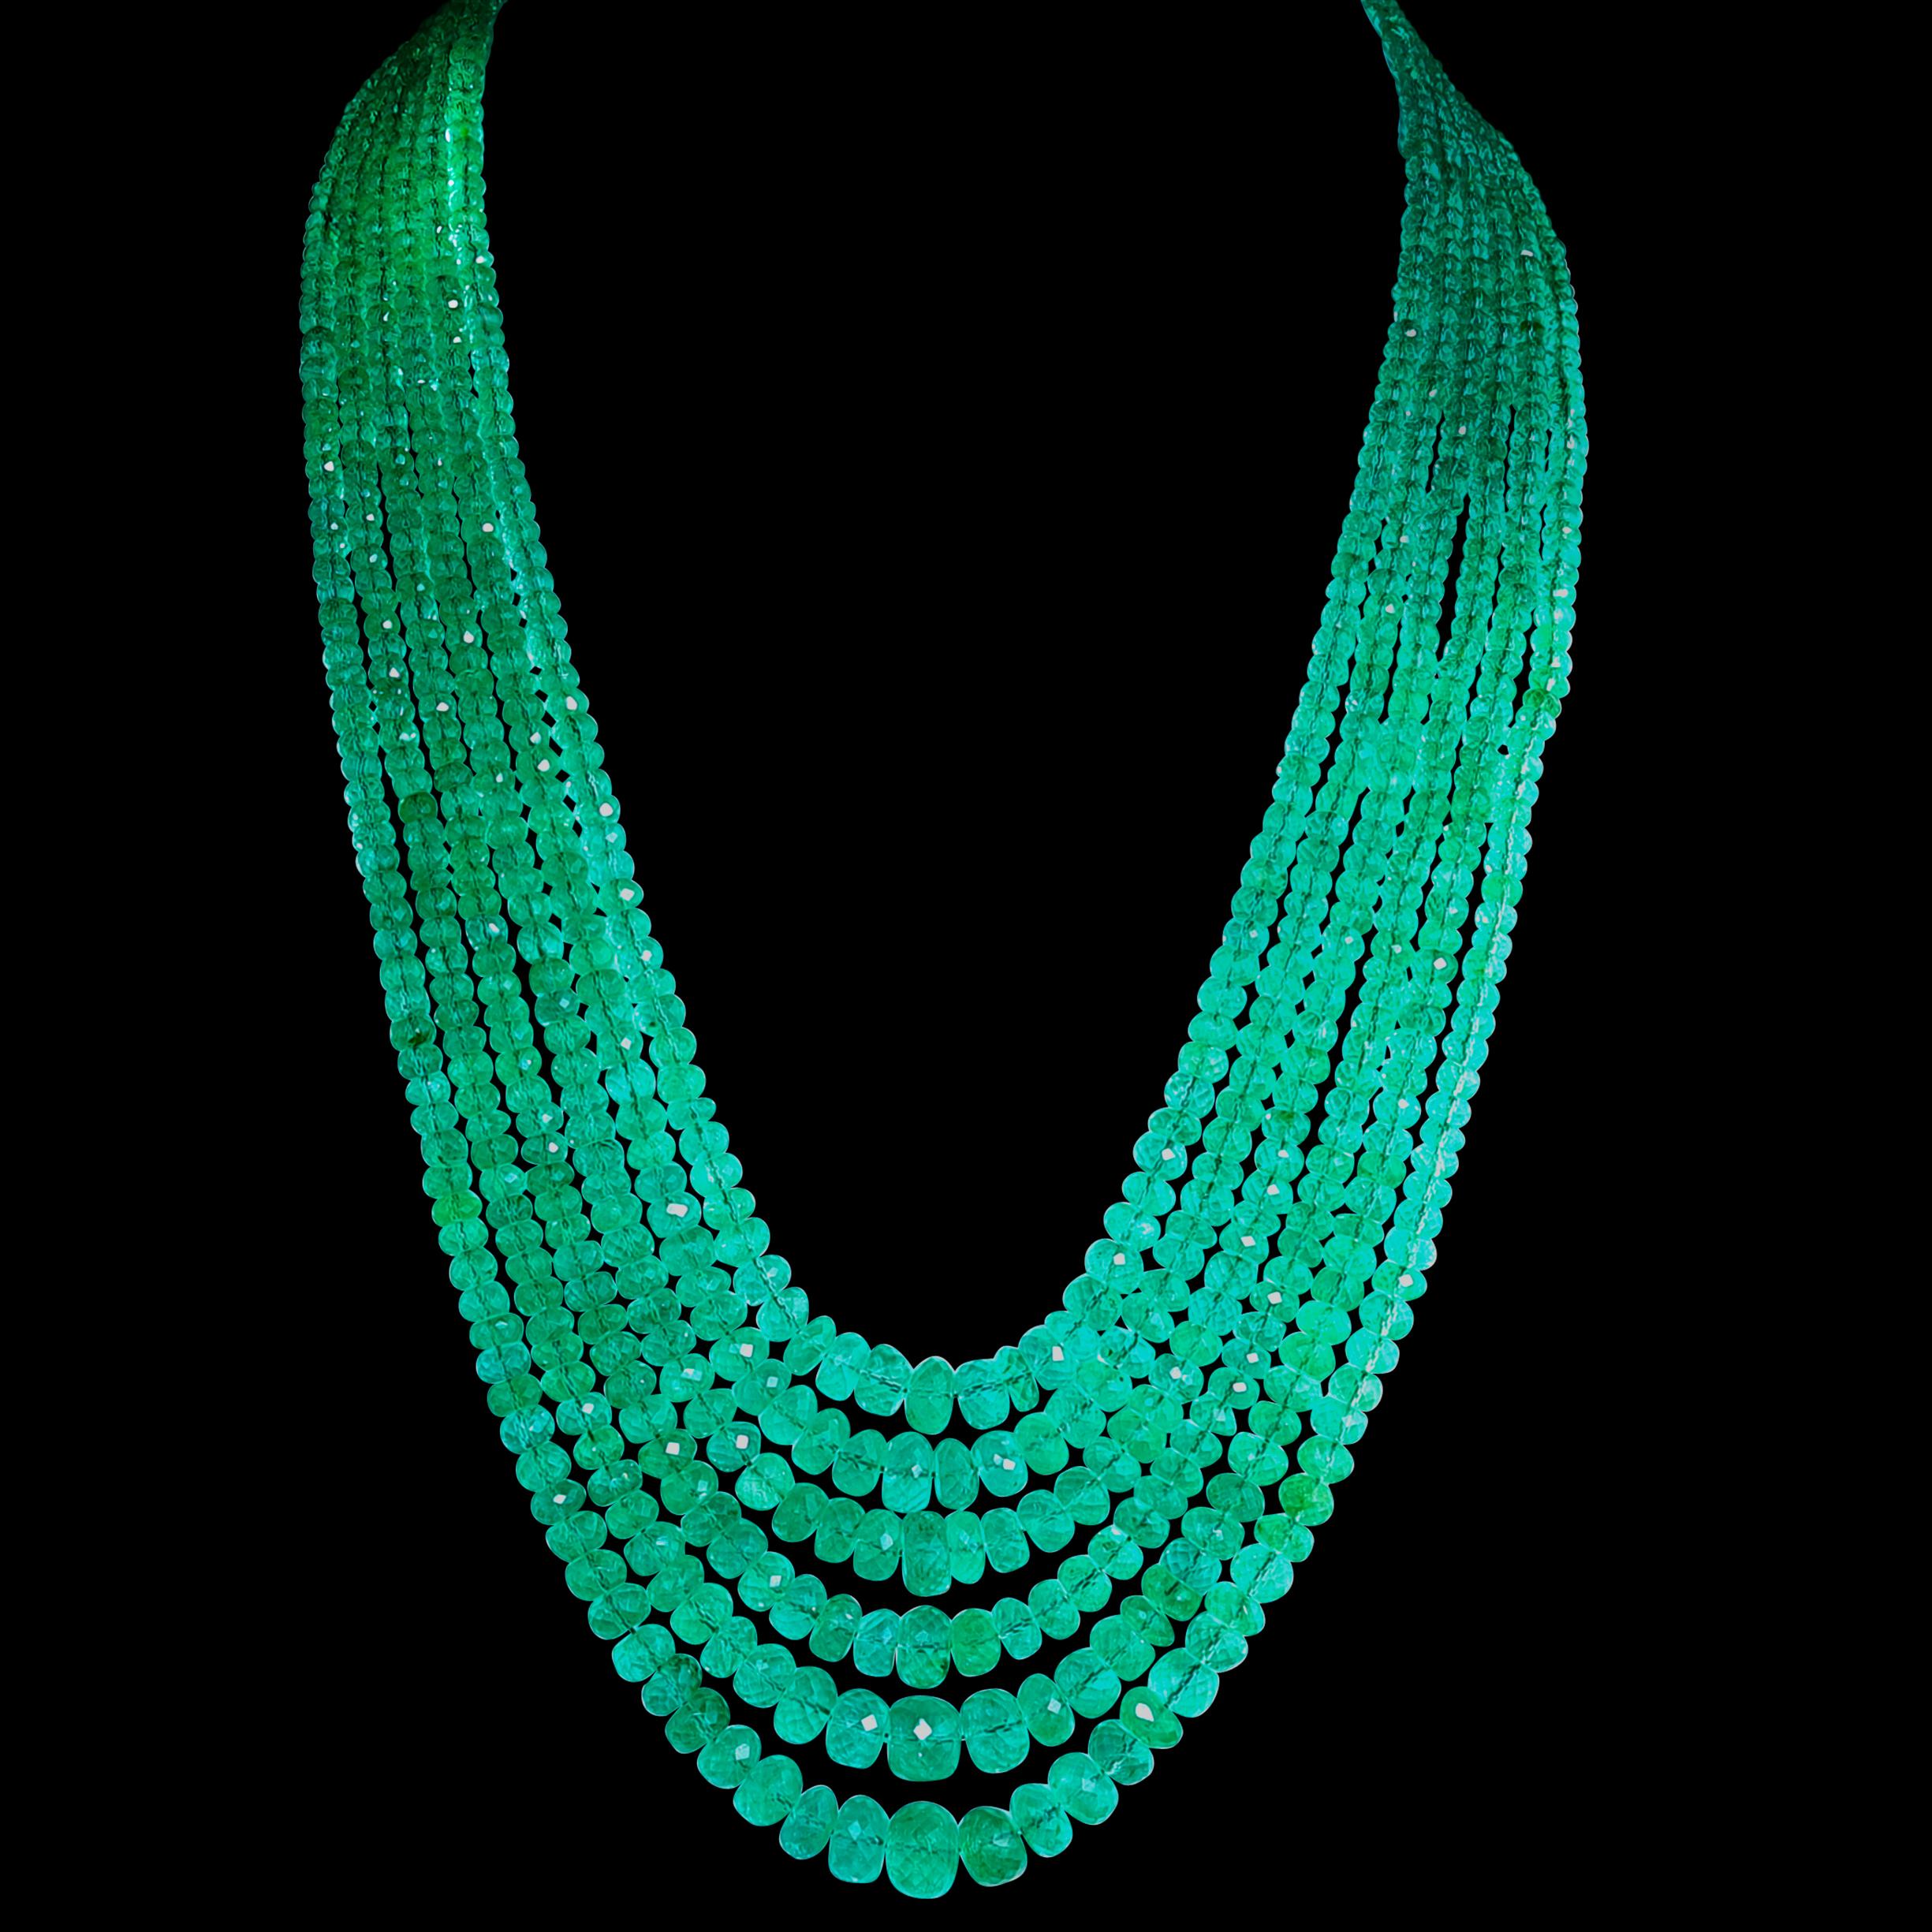 MAKE LISTING
200 Carat  Emerald Beads 7 Line  Necklace With Diamond Clasp 18 Kt Yellow Gold 
This spectacular Necklace   consisting of approximately 200 Ct  of fine beads.
 There are 7 rows of fine Emerald Beads  
Total carat weight of diamonds  is